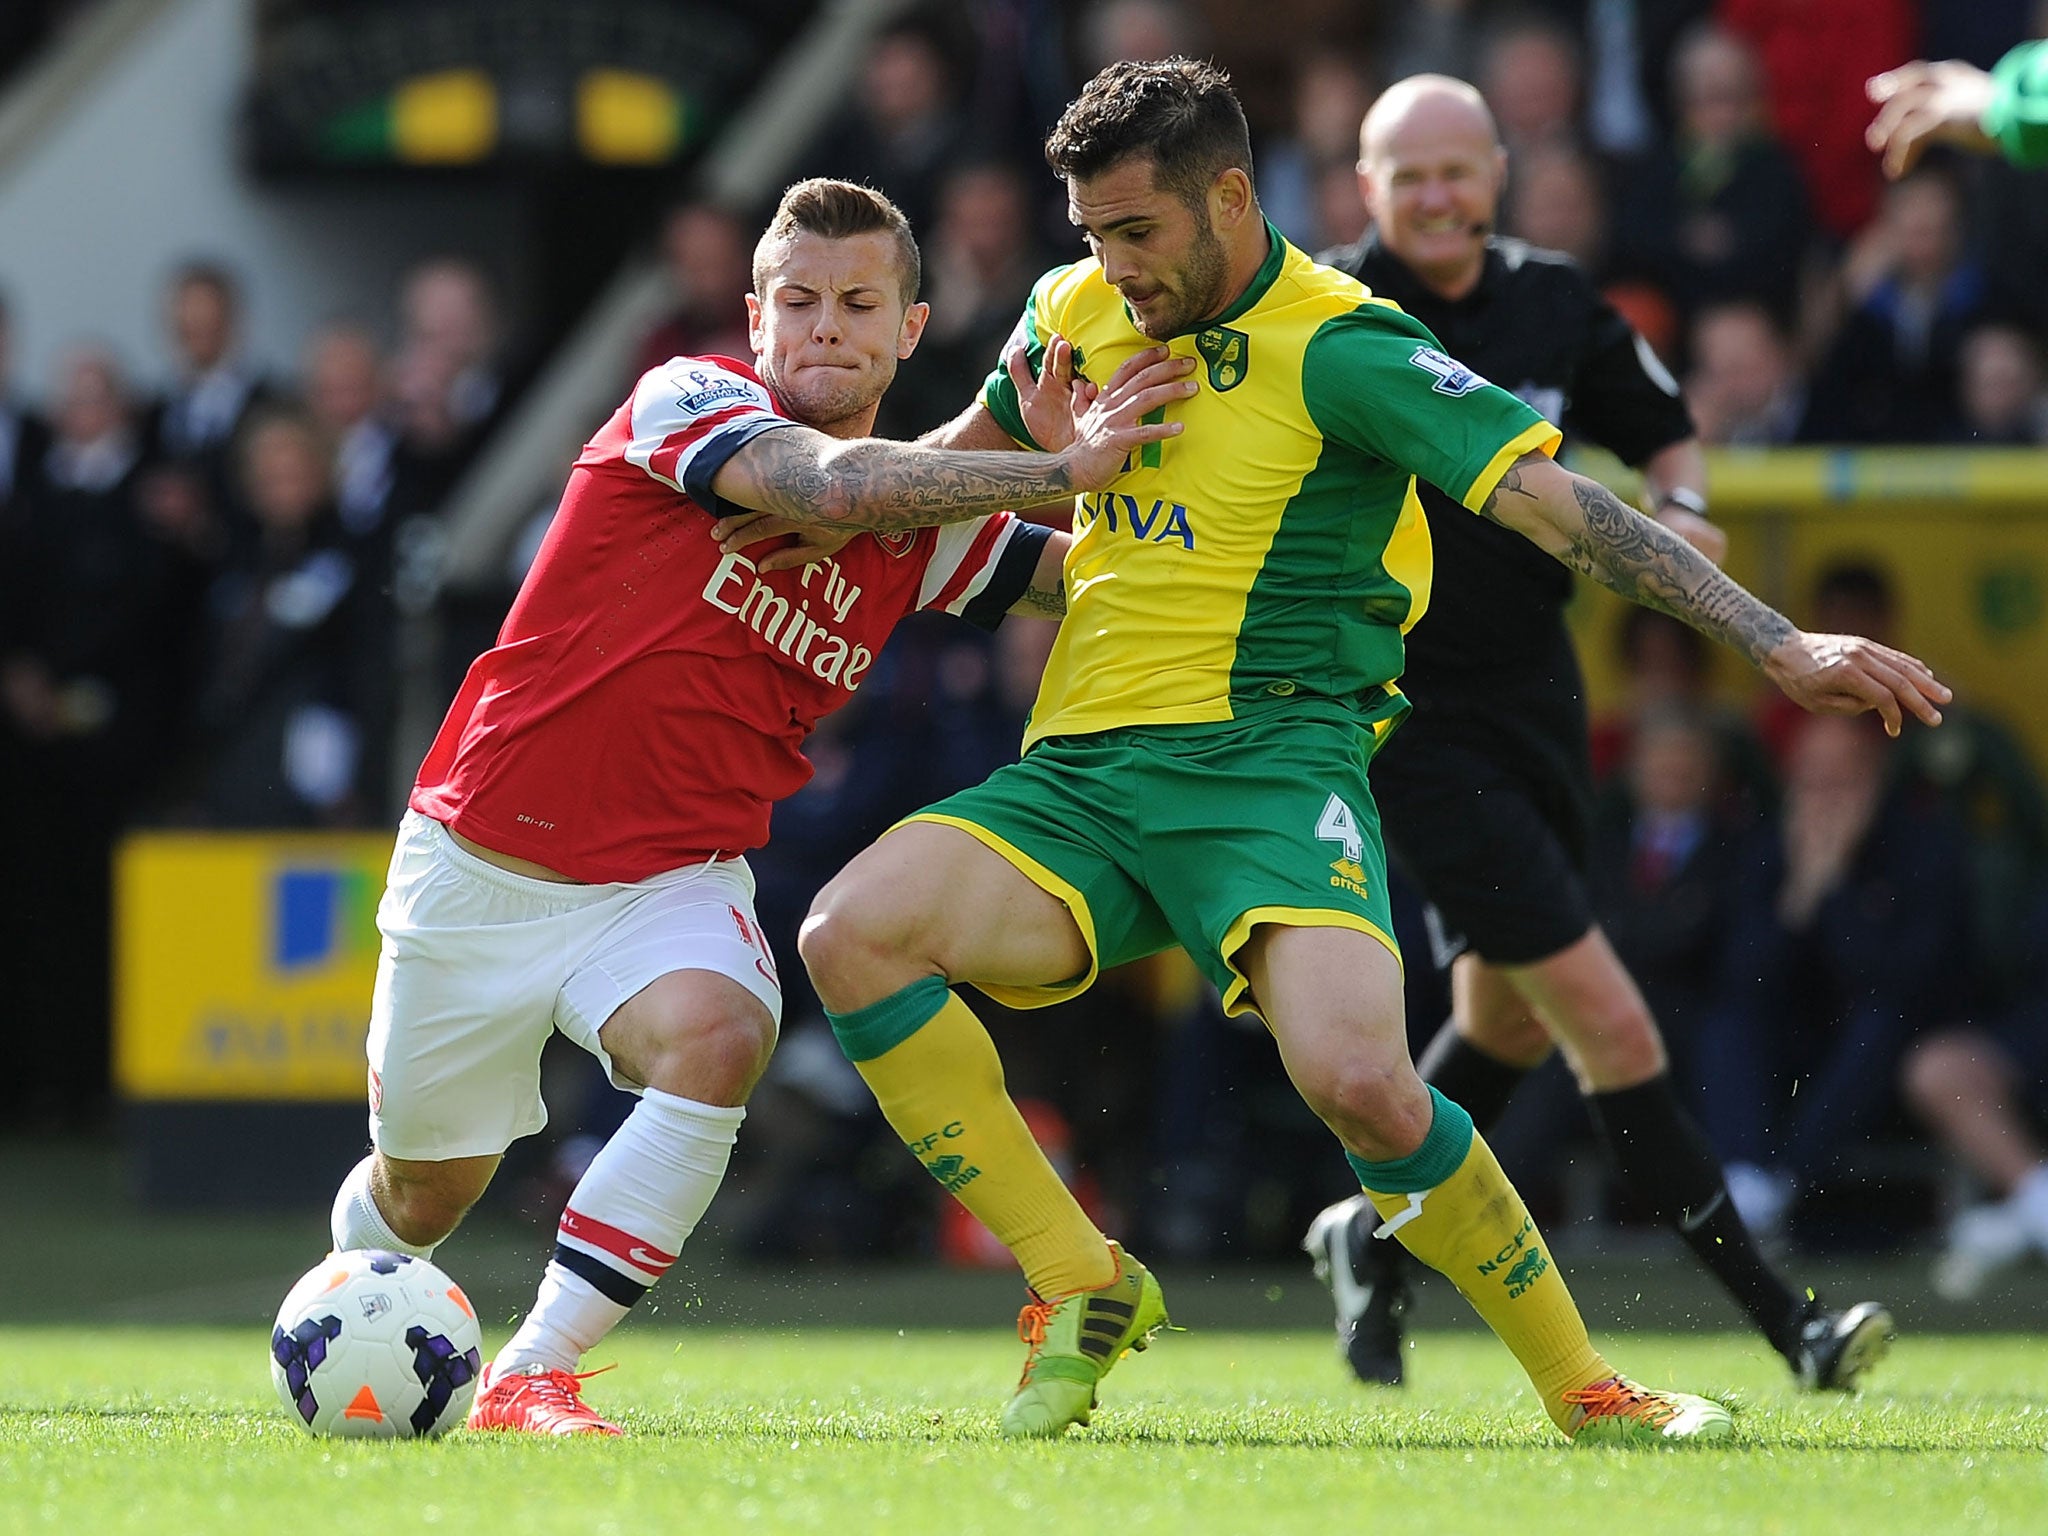 Jack Wilshere came on in the 63rd minute for Arsenal against Norwich on Sunday